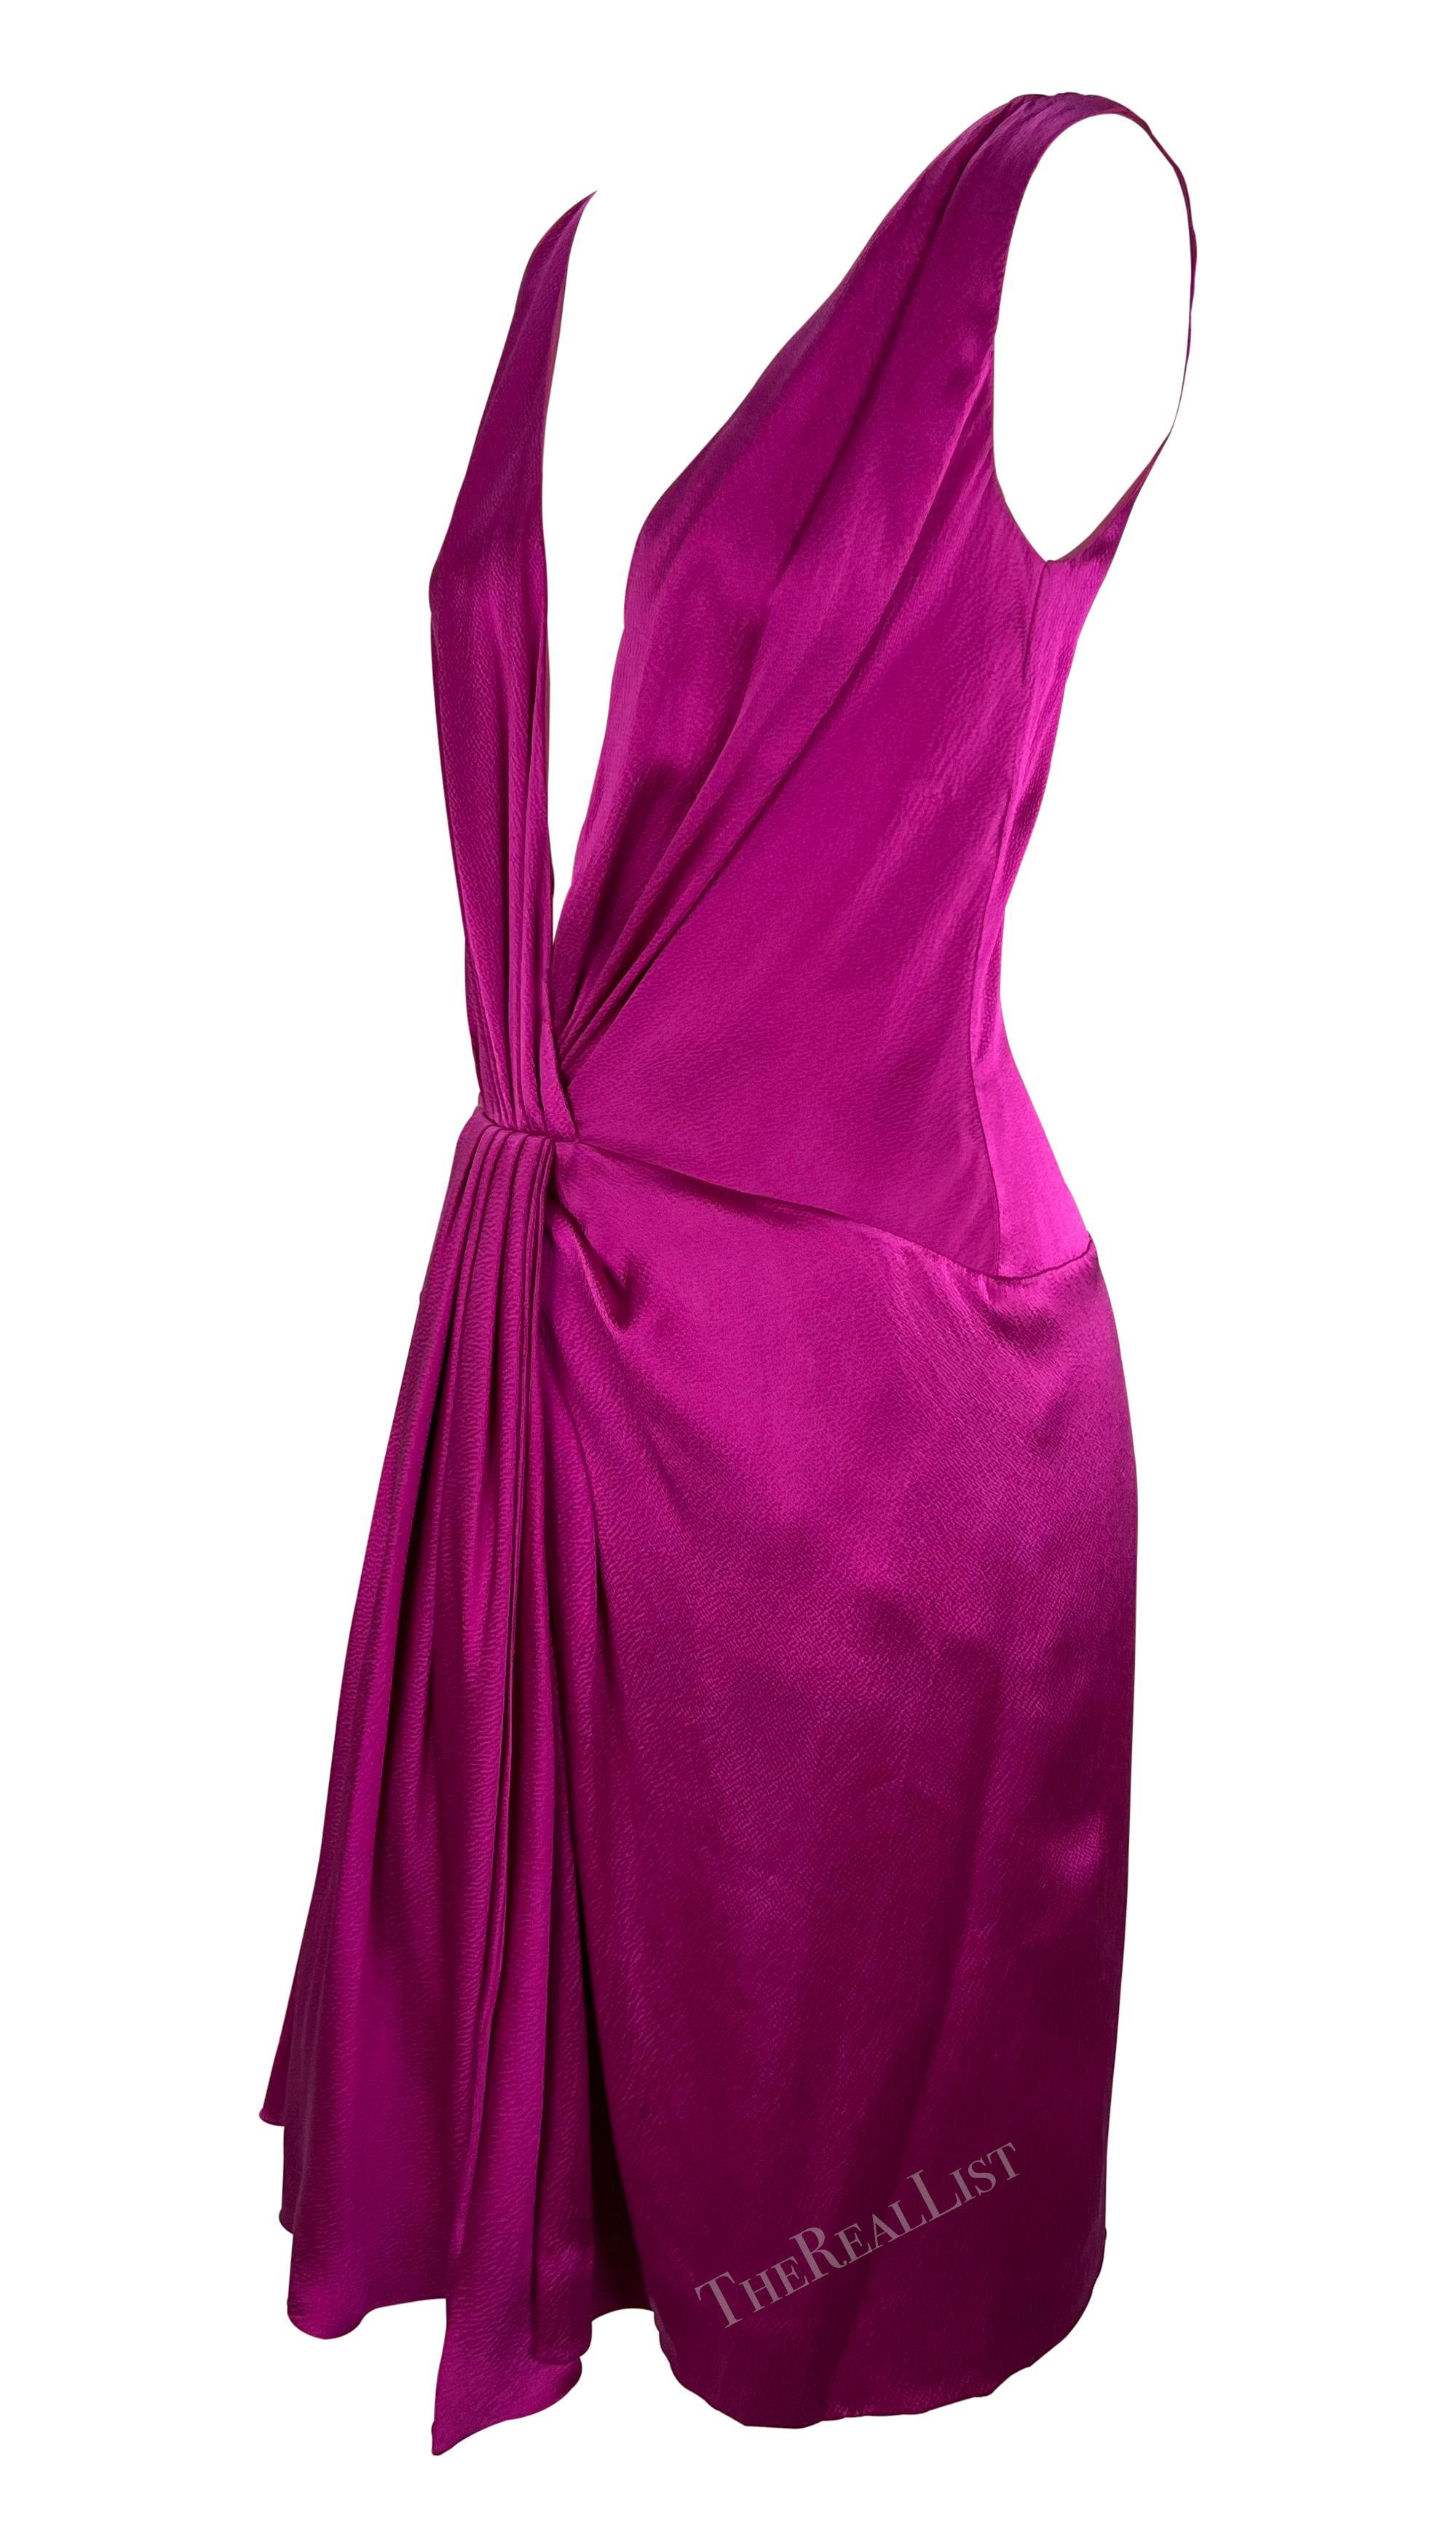 F/W 2007 Christian Dior by John Galliano Plunging Silk Fuchsia Mini Dress In Excellent Condition For Sale In West Hollywood, CA